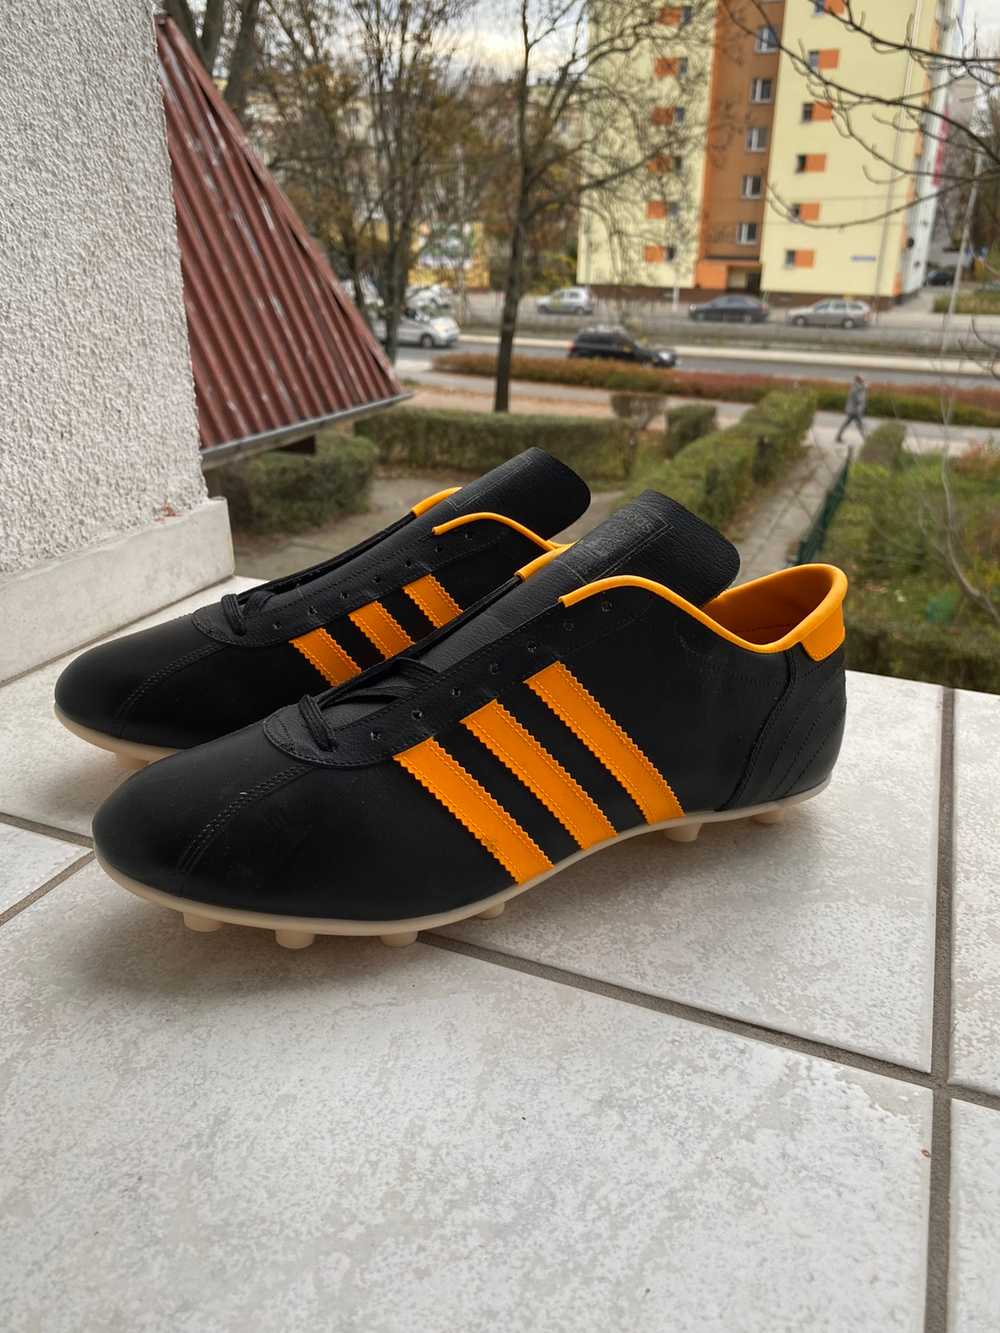 Adidas Kid made in France 70-80s football boots - image 1